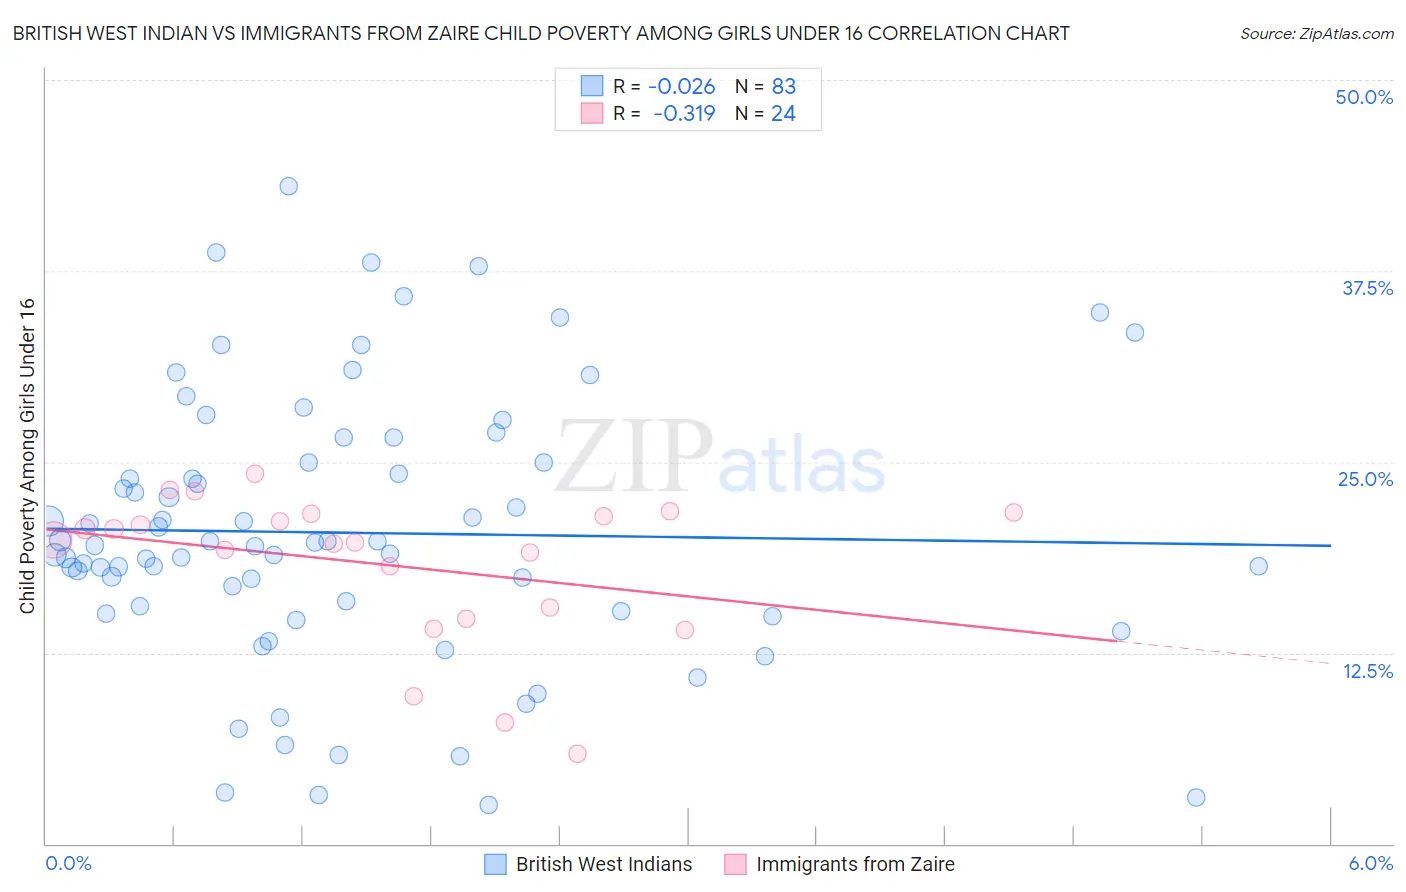 British West Indian vs Immigrants from Zaire Child Poverty Among Girls Under 16